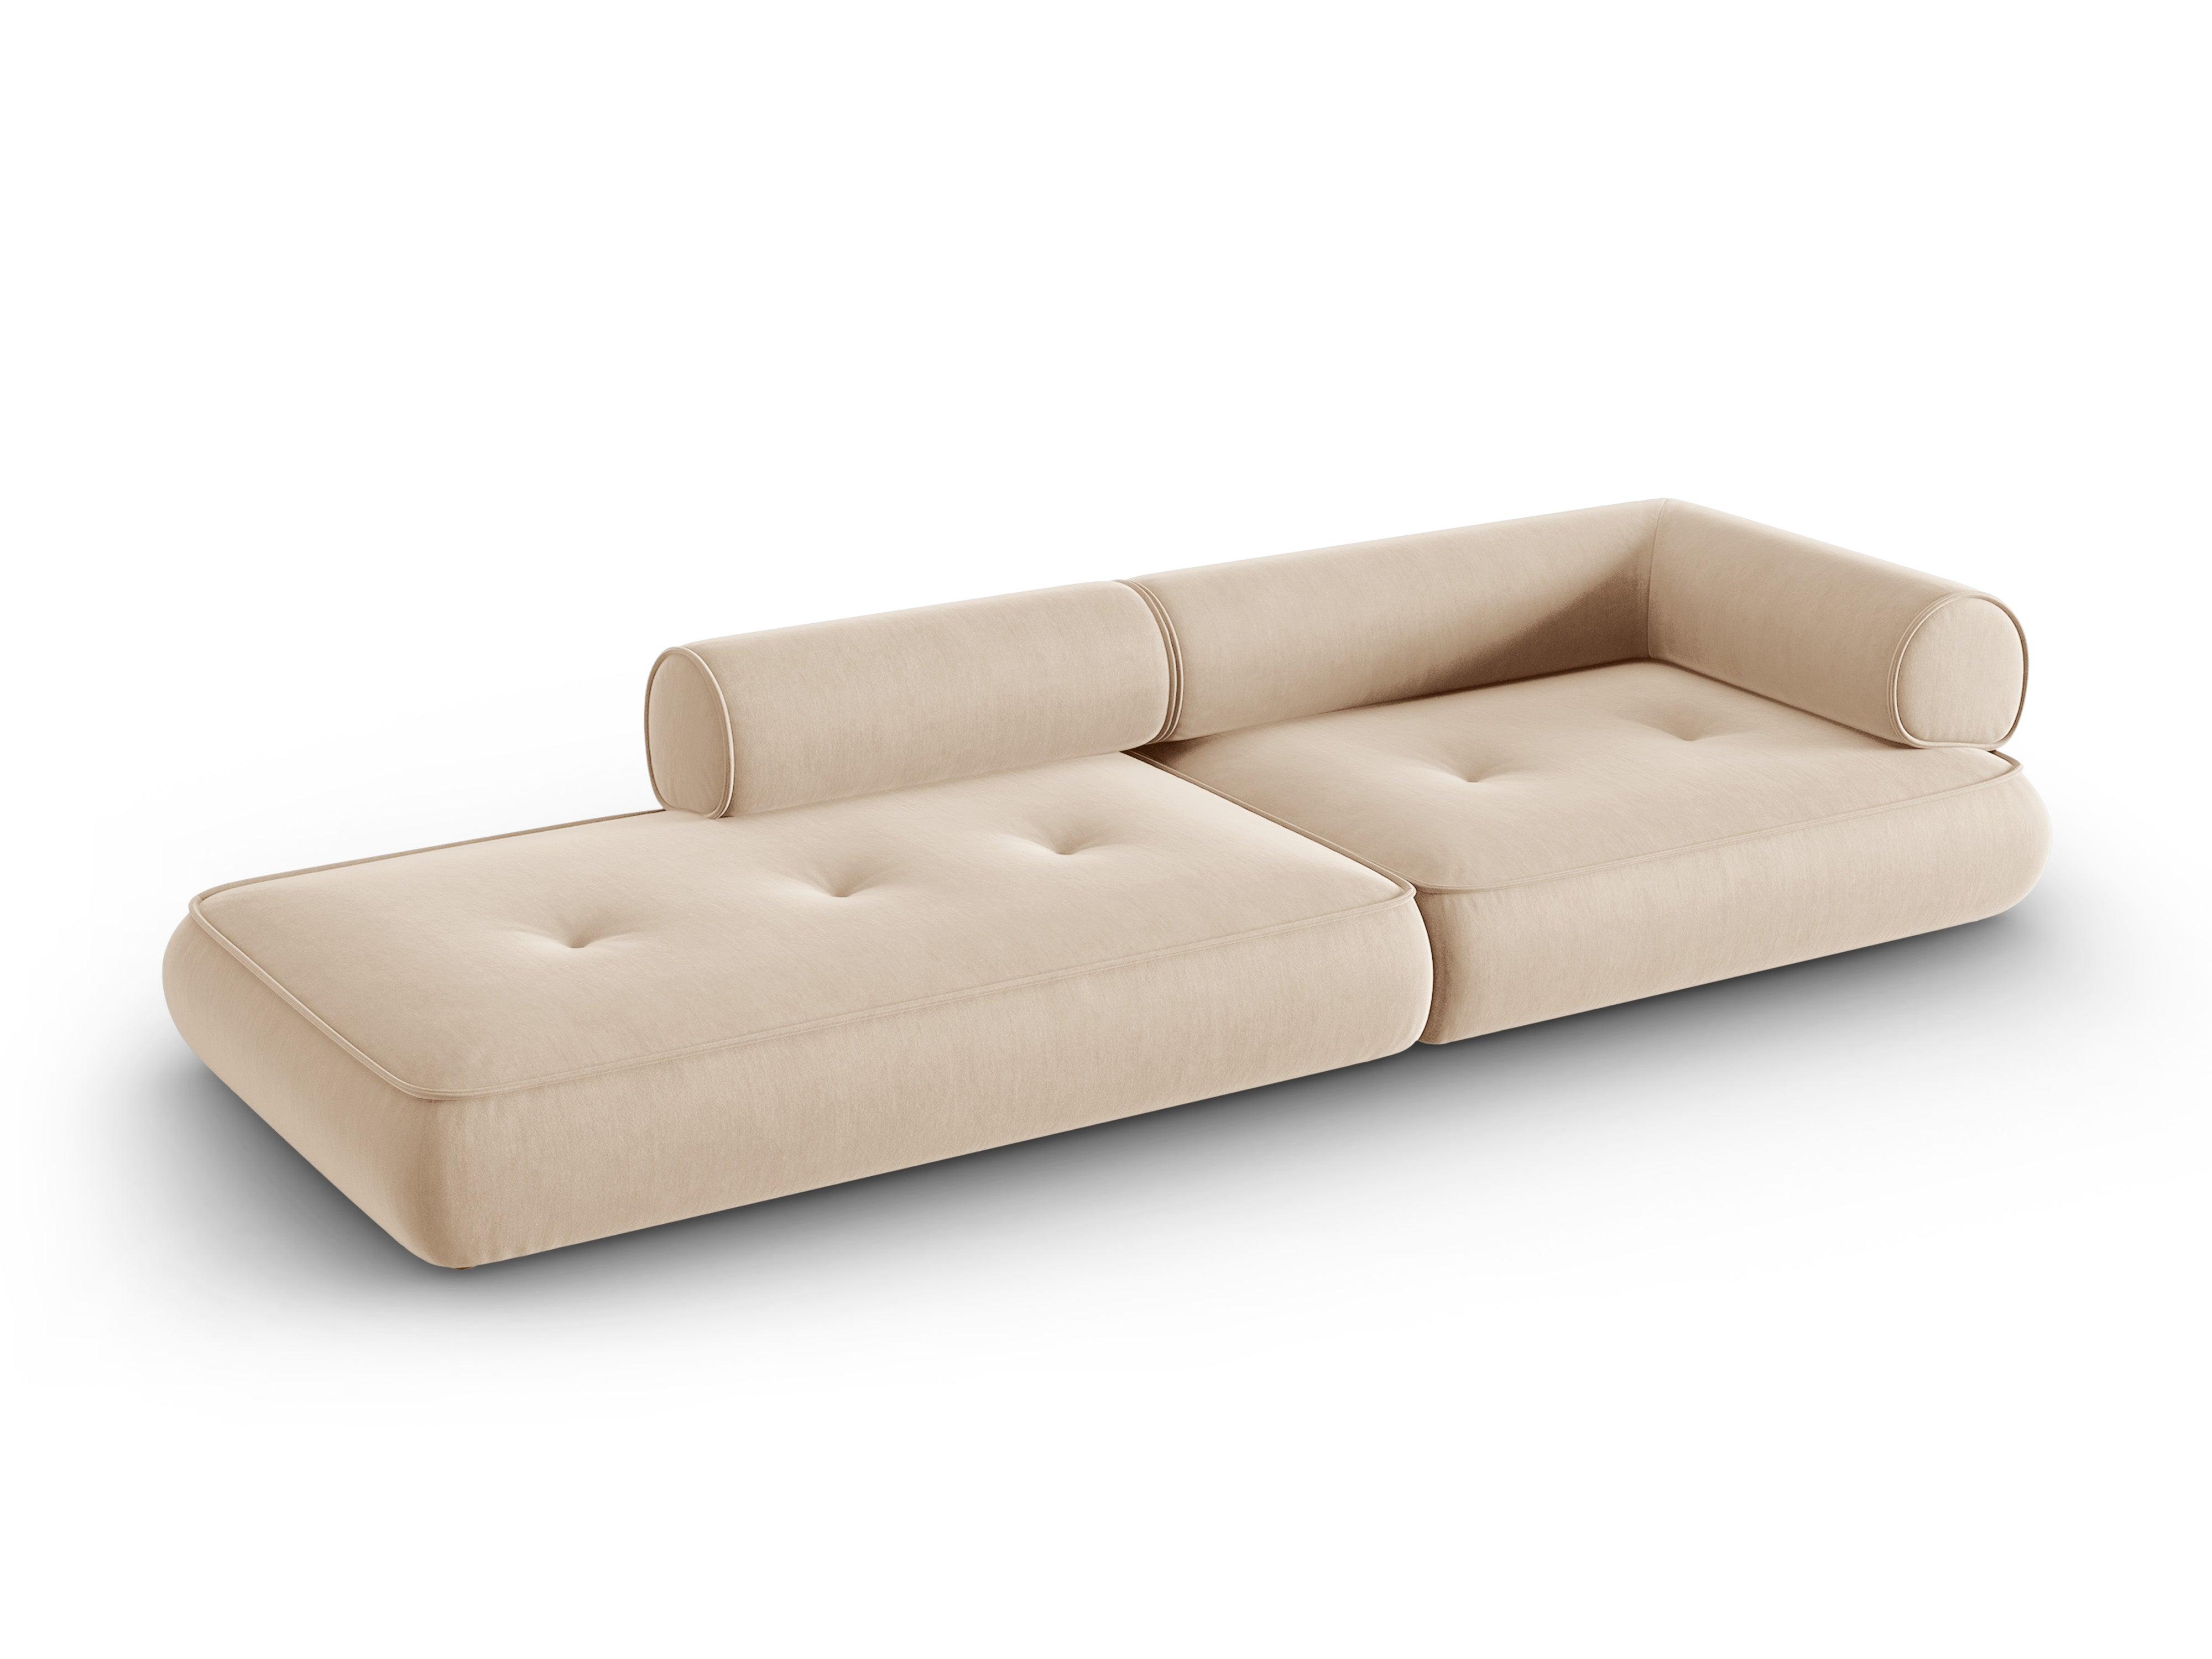 Modular Left Open Sofa, "Lily", 4 Seats, 292x105x74
 Made in Europe, Maison Heritage, Eye on Design